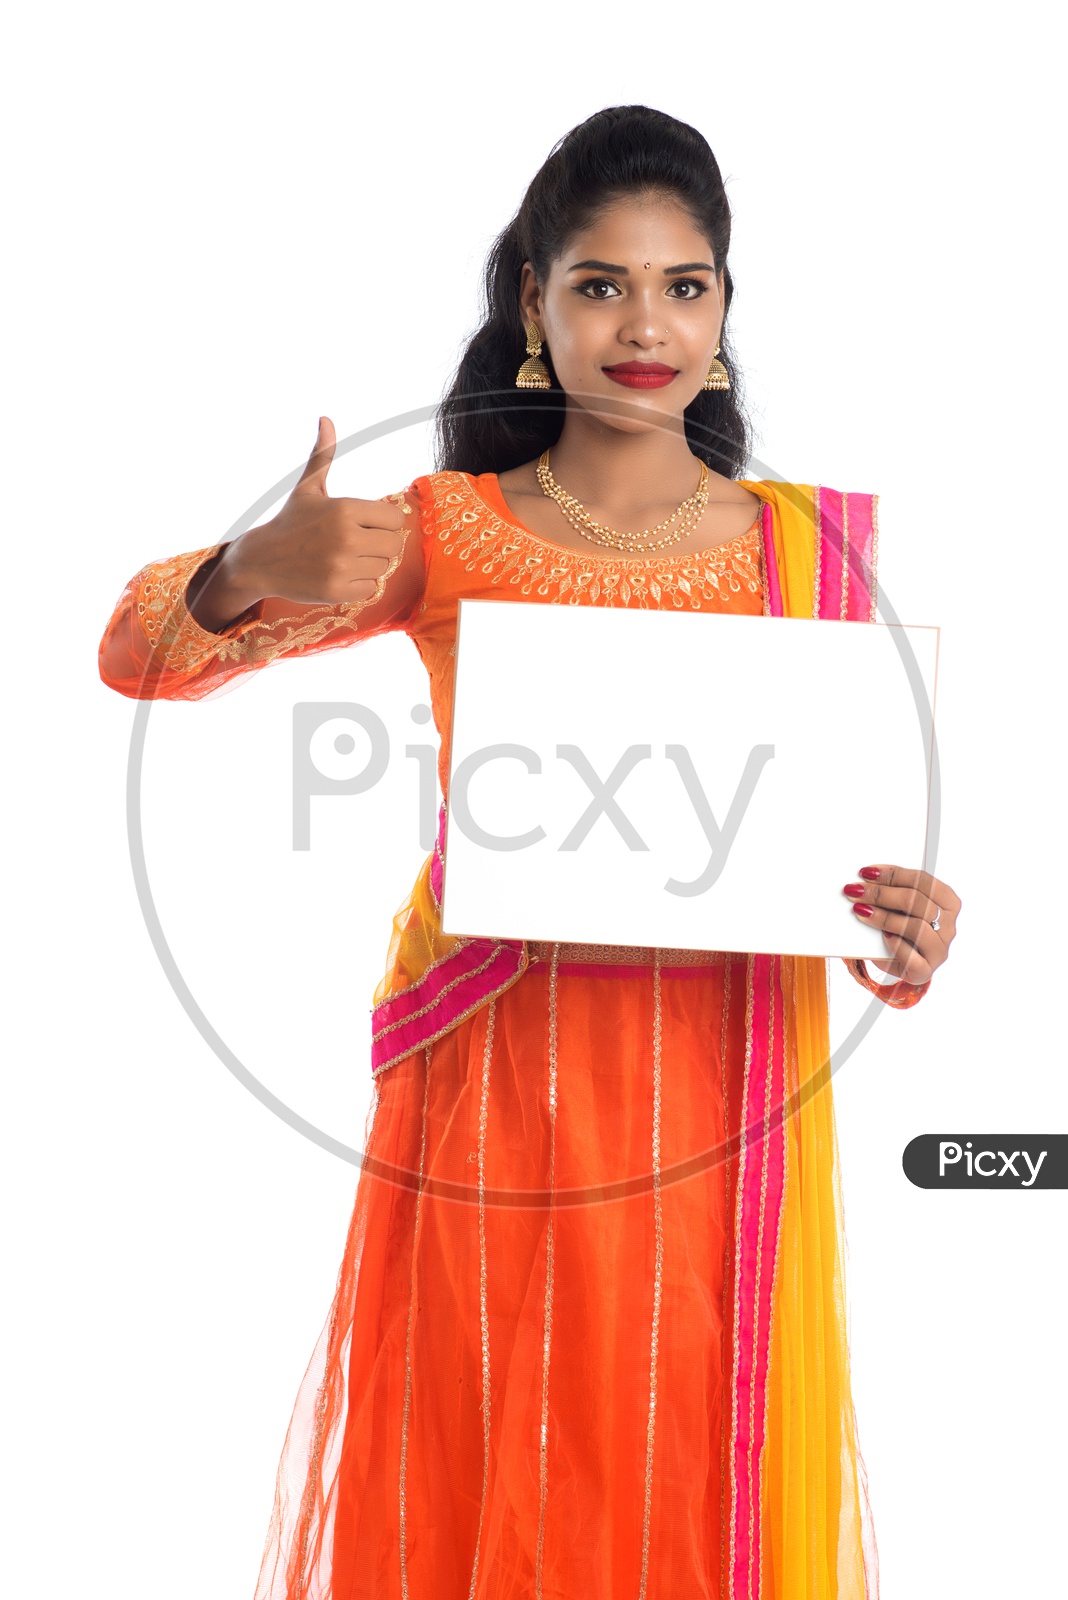 A young pretty Indian woman holding a blank white board or card with a gesture